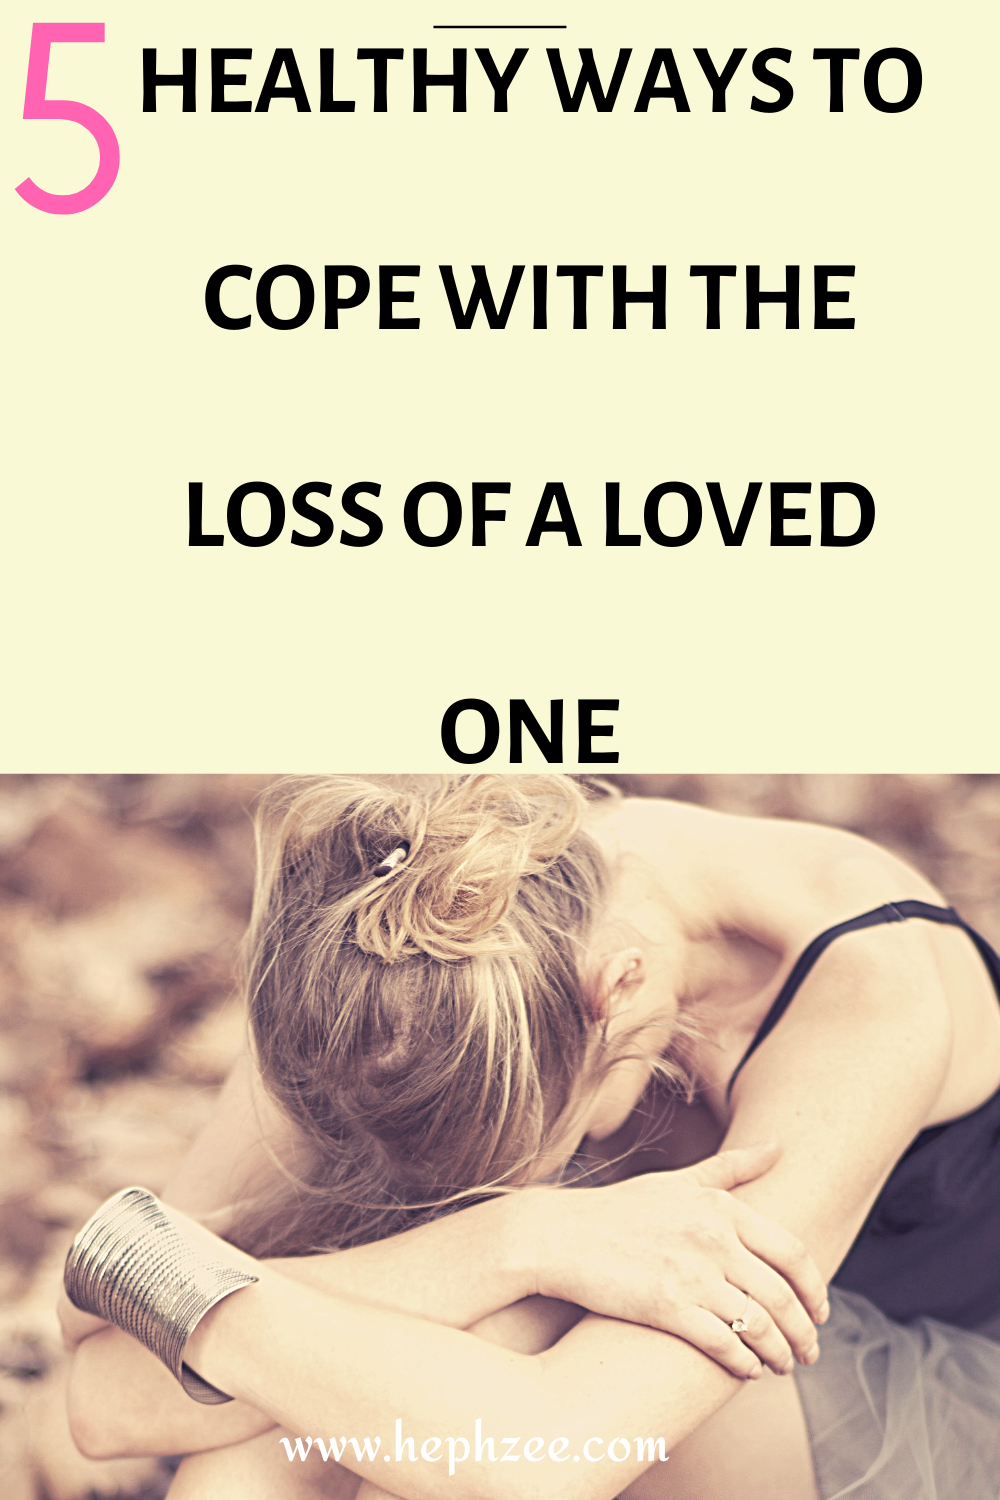 Healthy ways to deal with grief